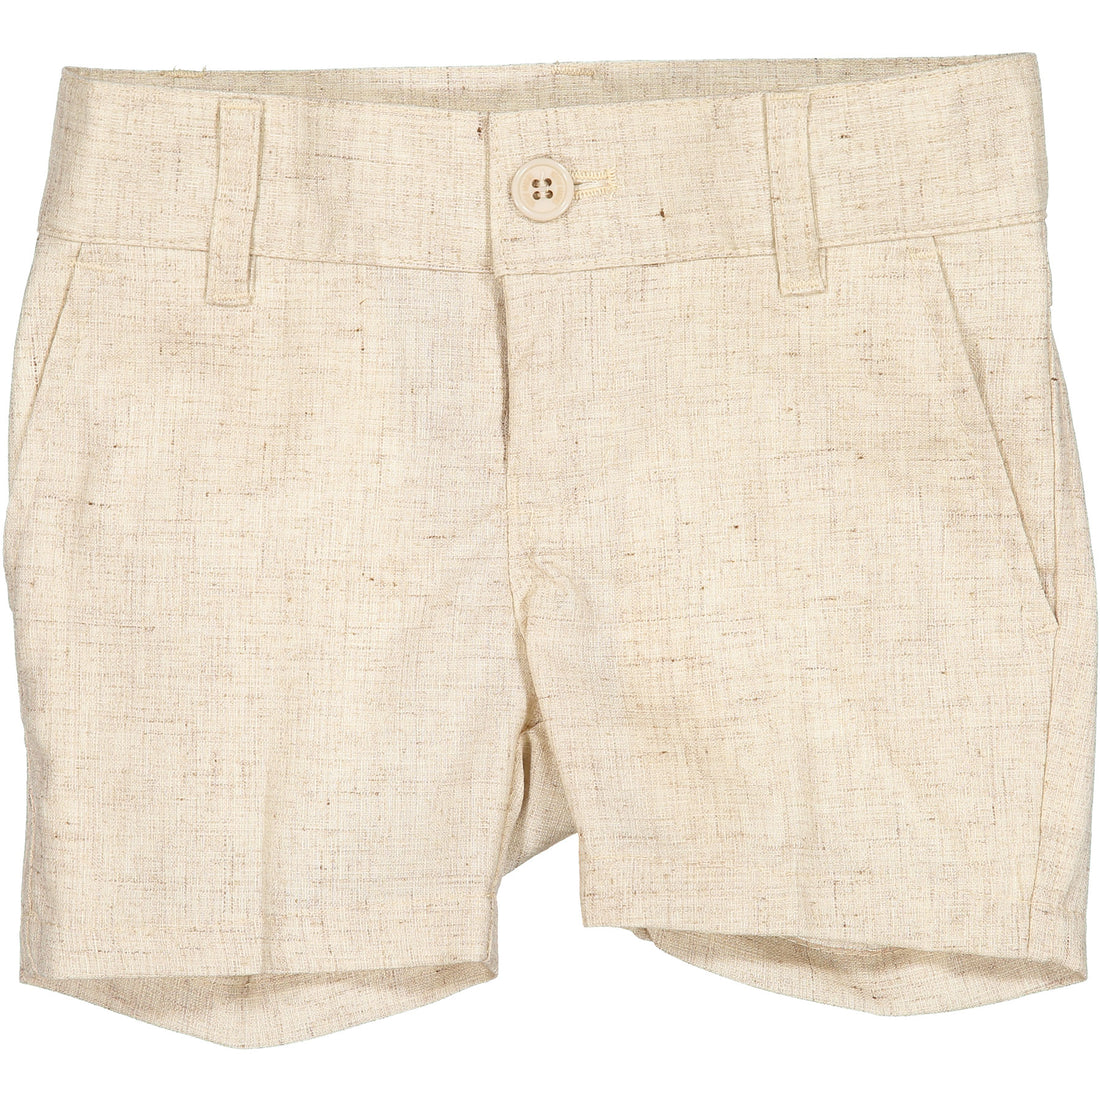 Boys and Arrows Beige Linen Skinny Shorts